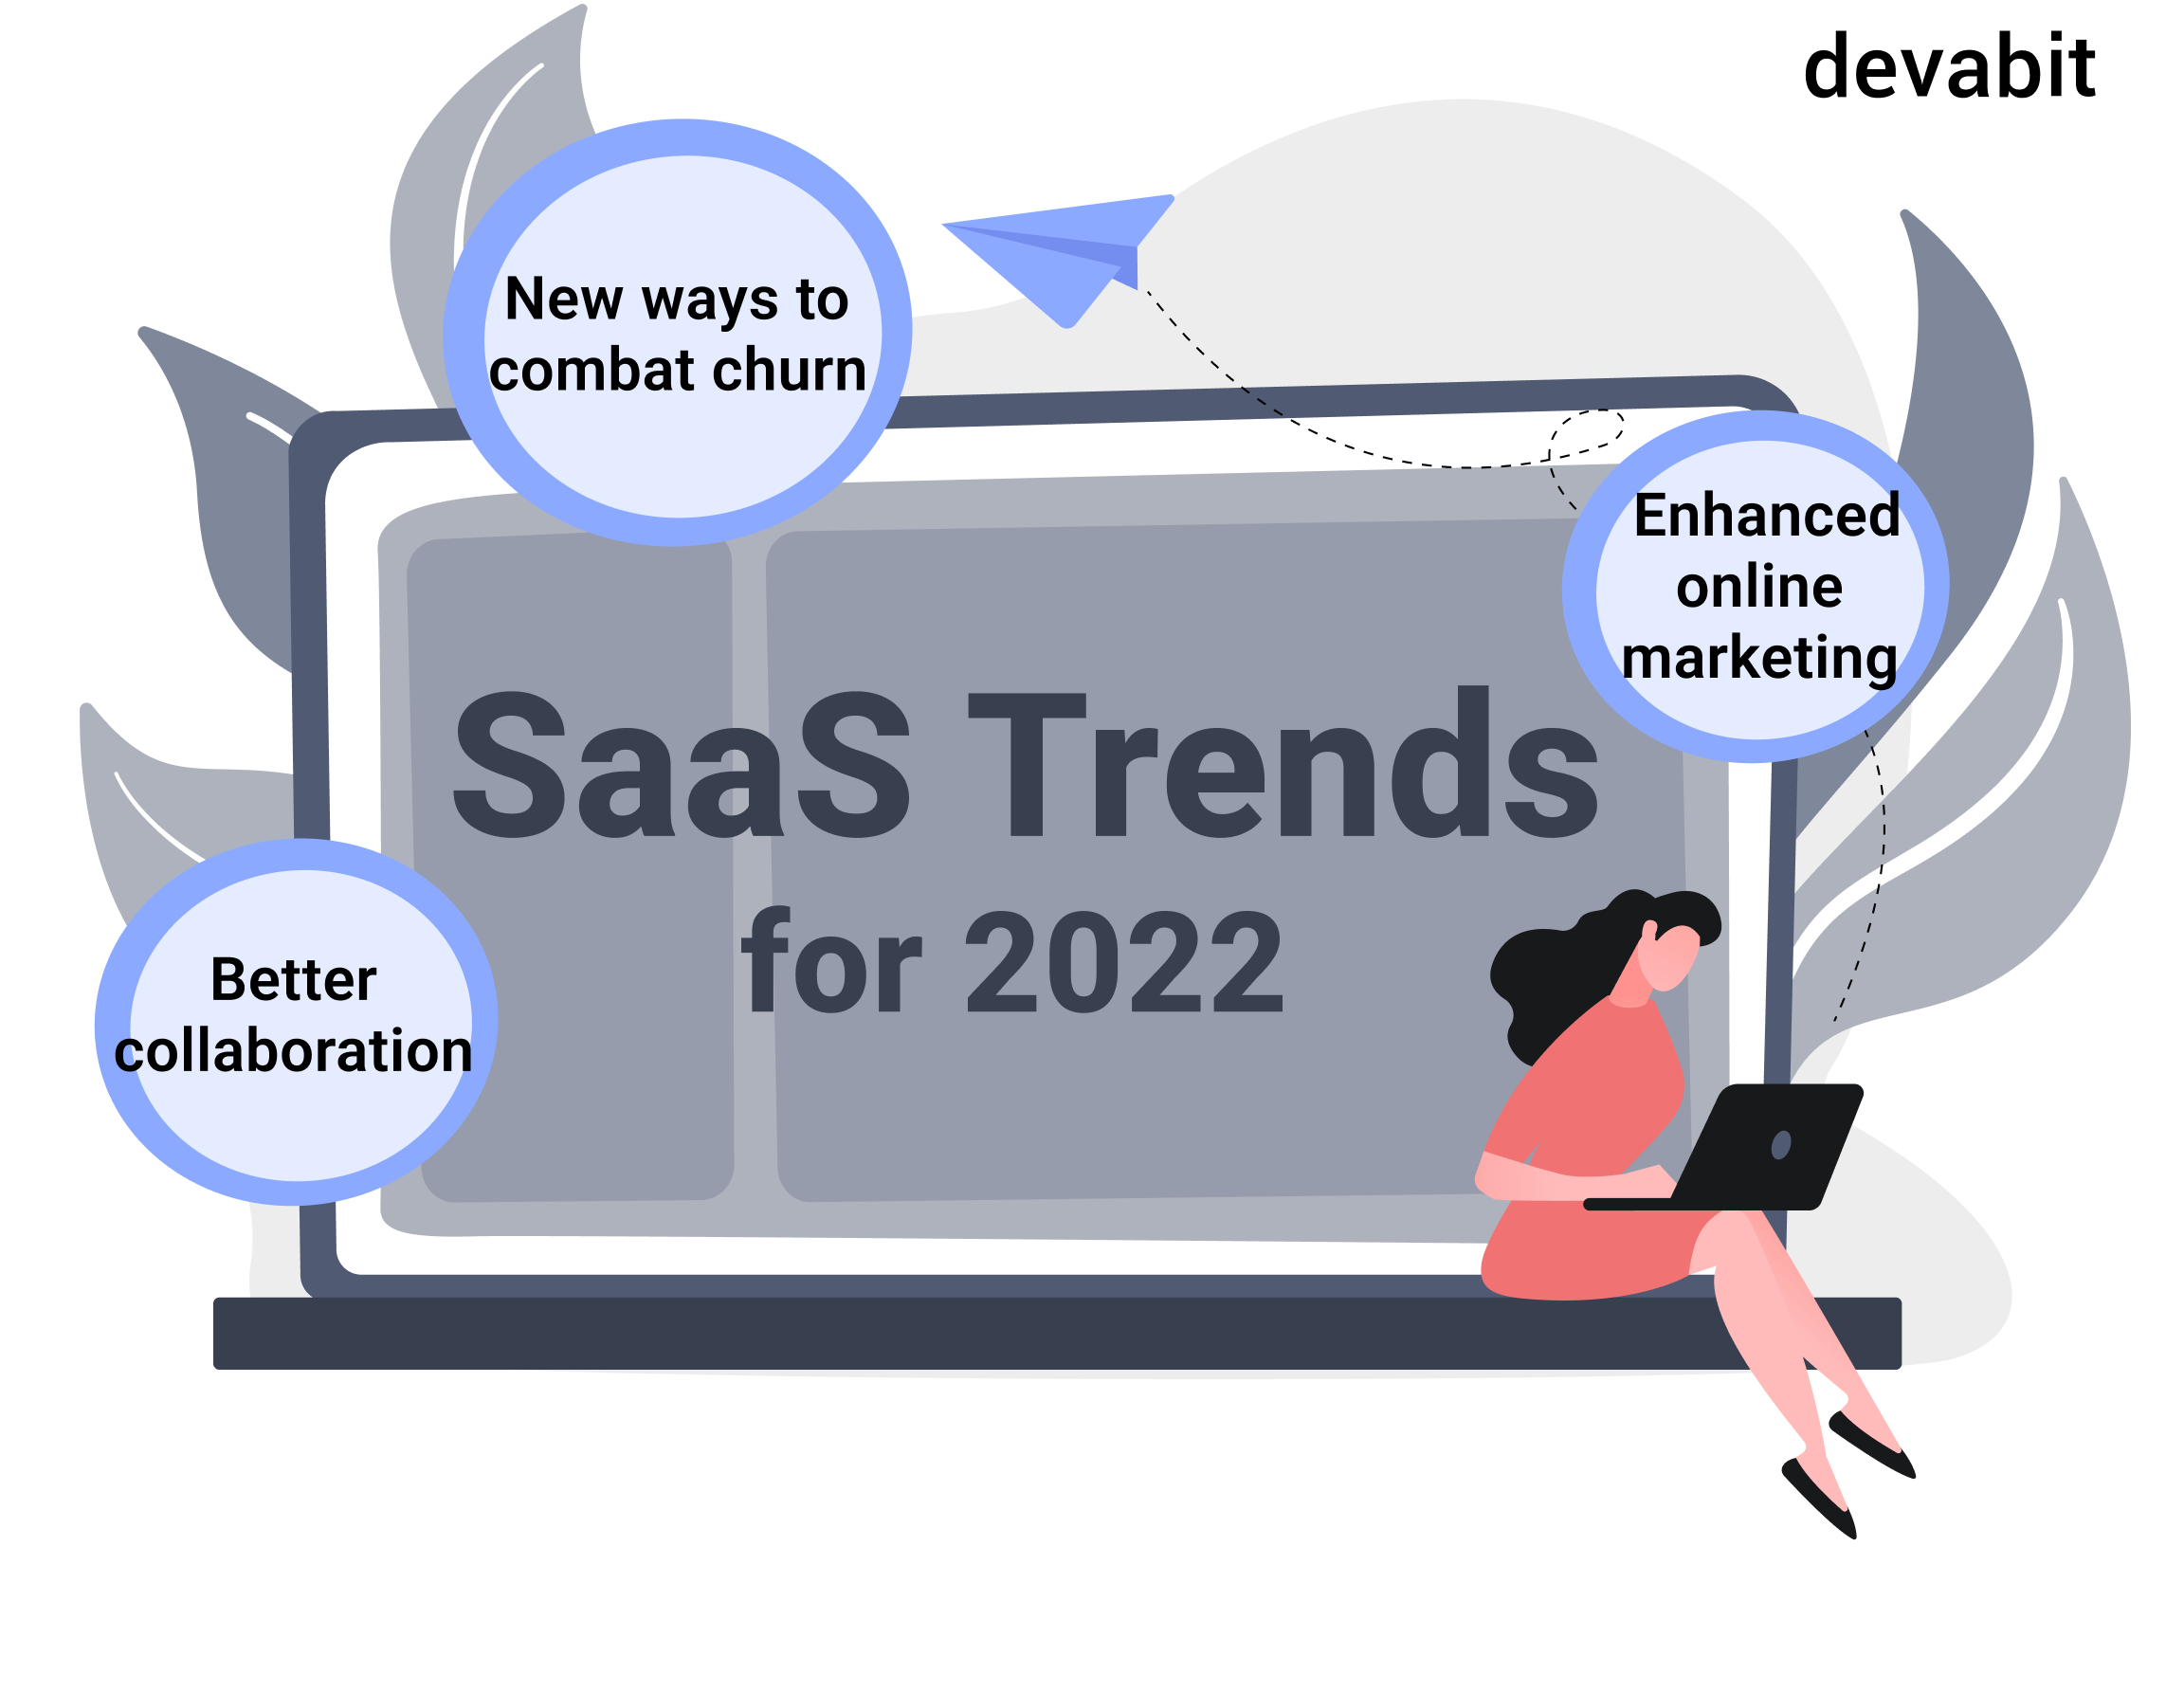 SaaS trends for 2022